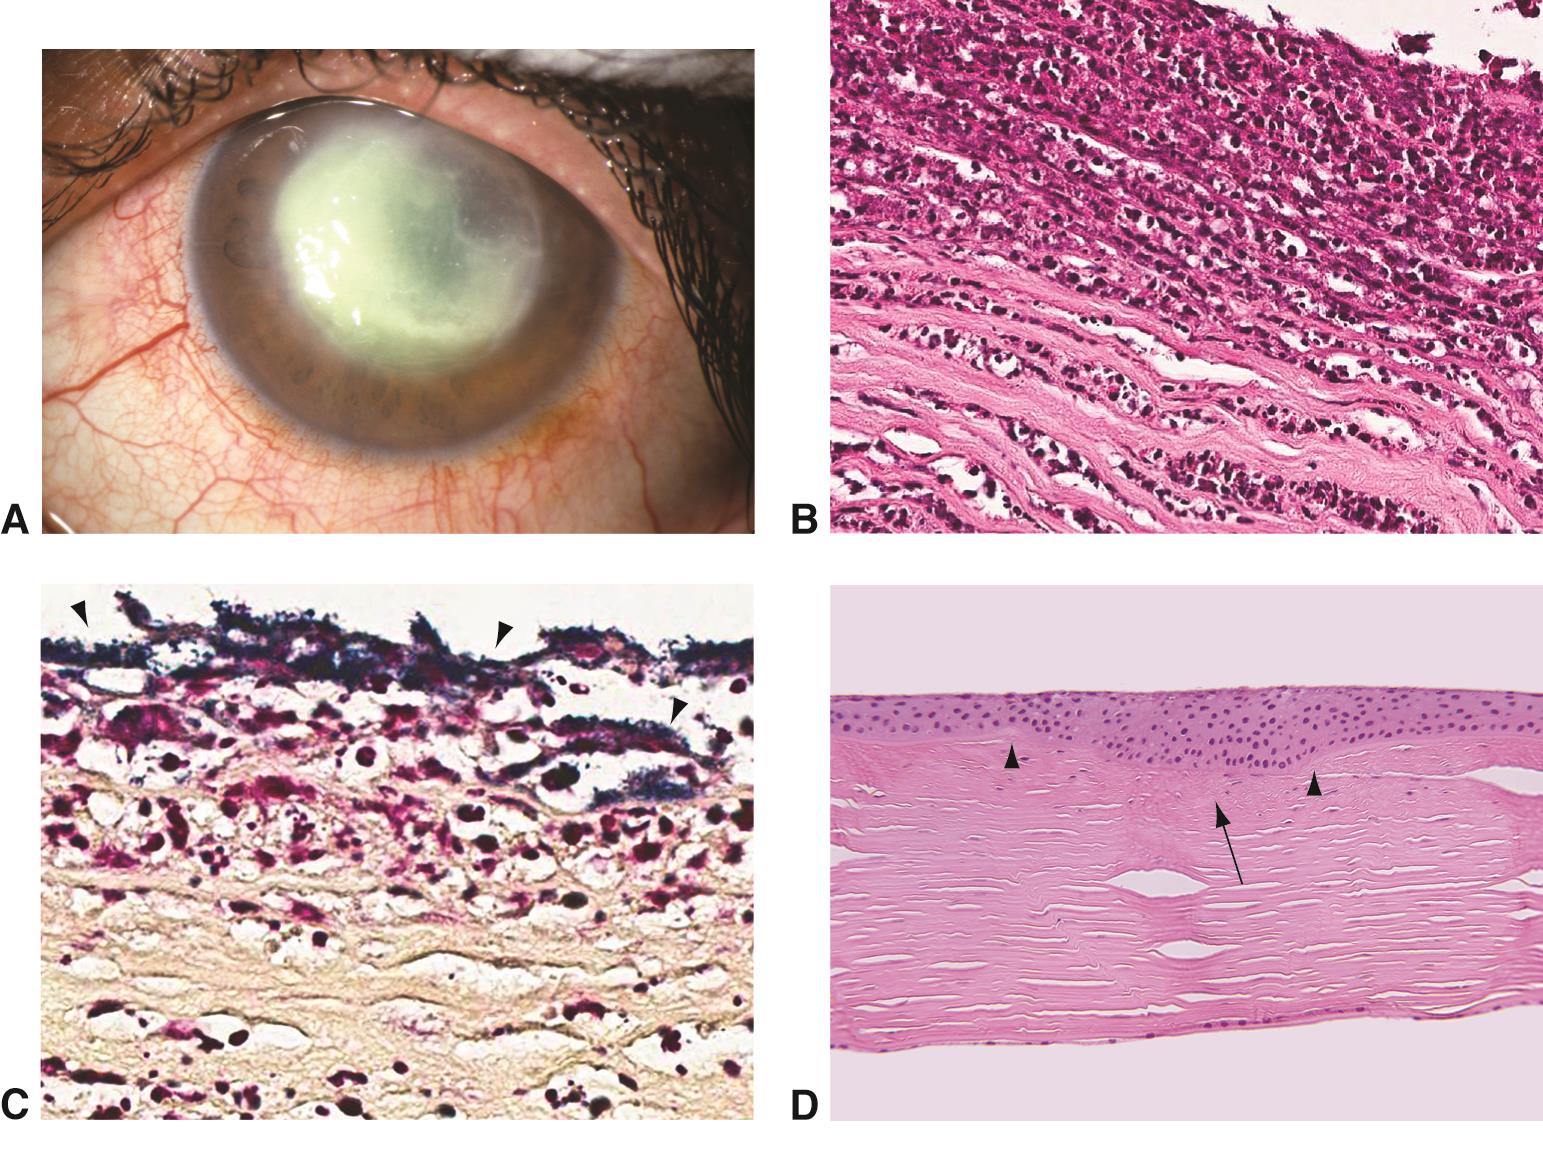 Bacterial ulcer - American Academy of Ophthalmology